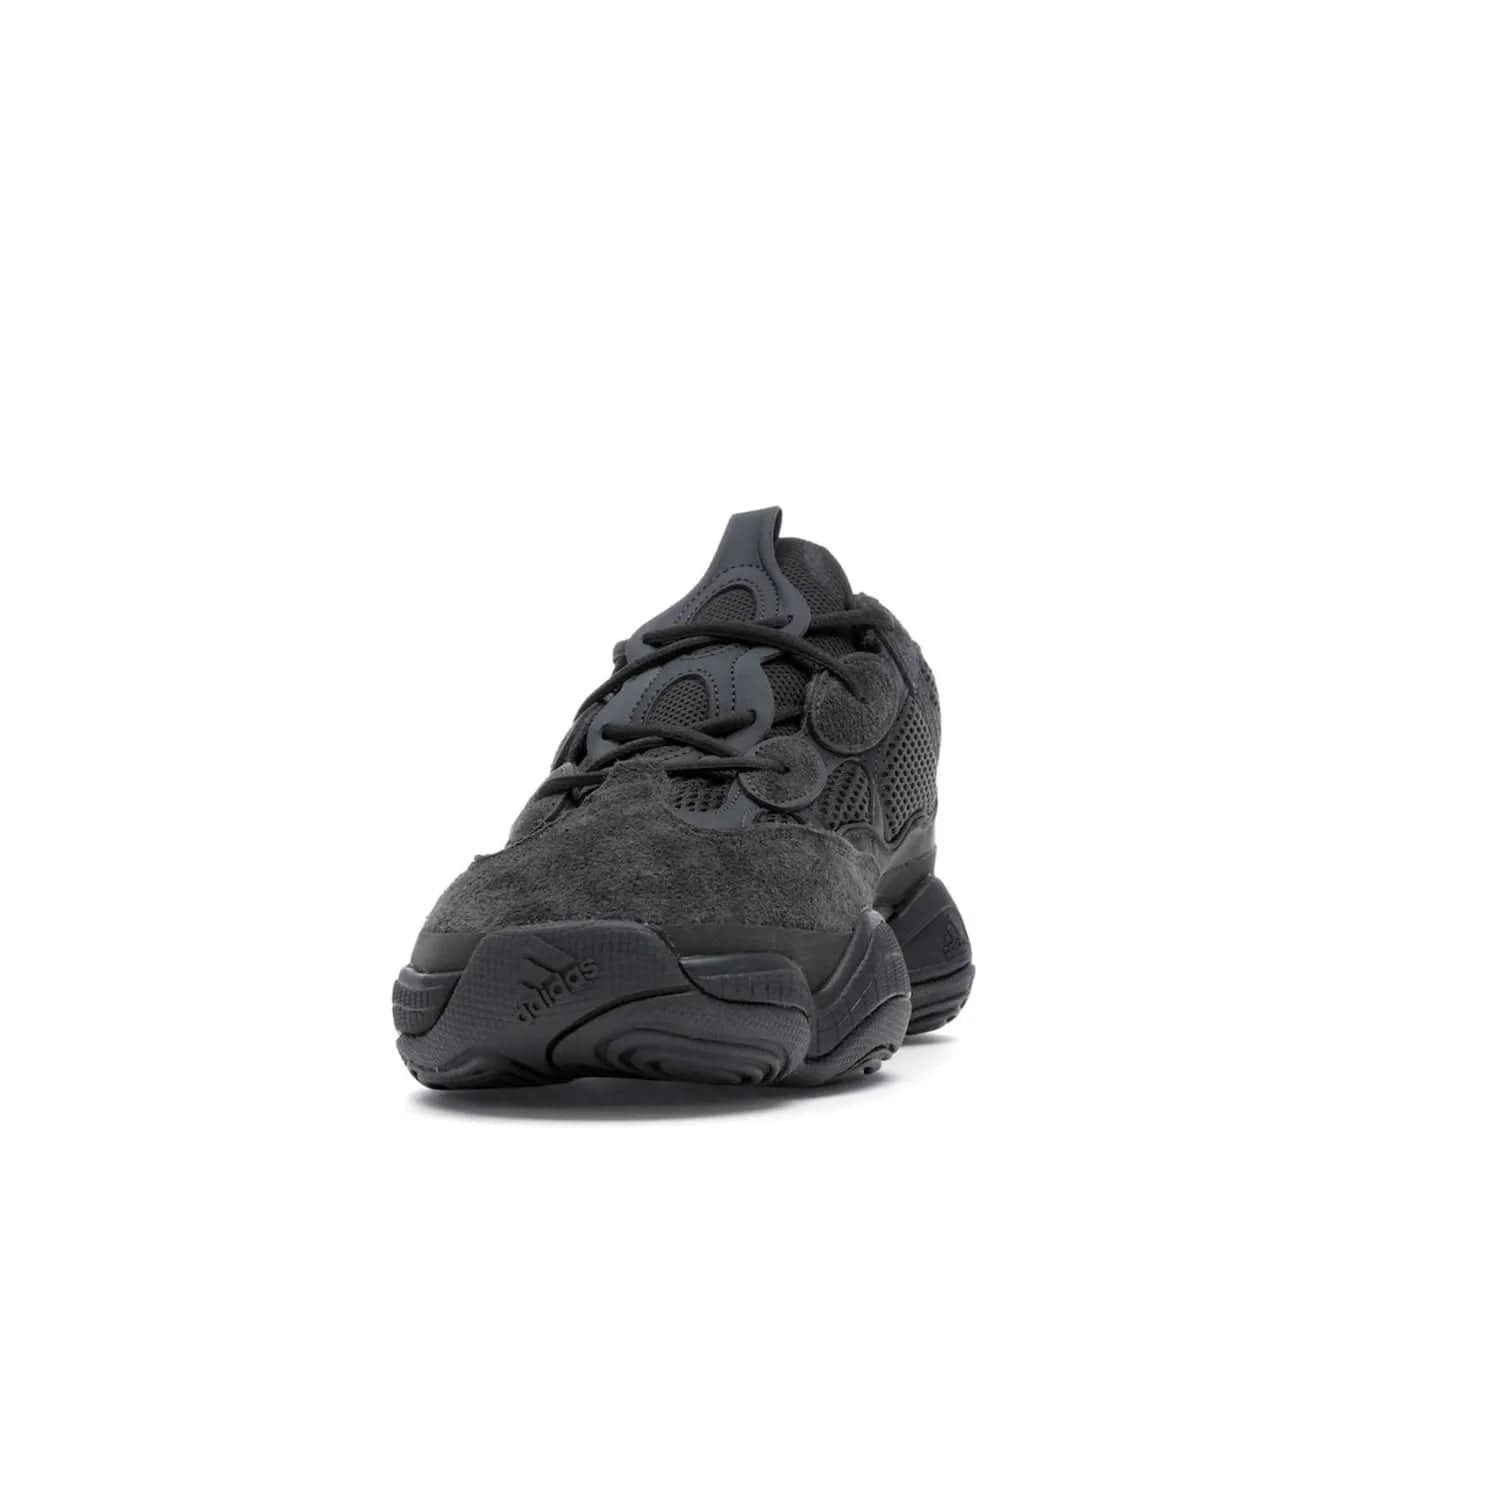 adidas Yeezy 500 Utility Black - Image 12 - Only at www.BallersClubKickz.com - Iconic adidas Yeezy 500 Utility Black in All-Black colorway. Durable black mesh and suede upper with adiPRENE® sole delivers comfort and support. Be unstoppable with the Yeezy 500 Utility Black. Released July 2018.